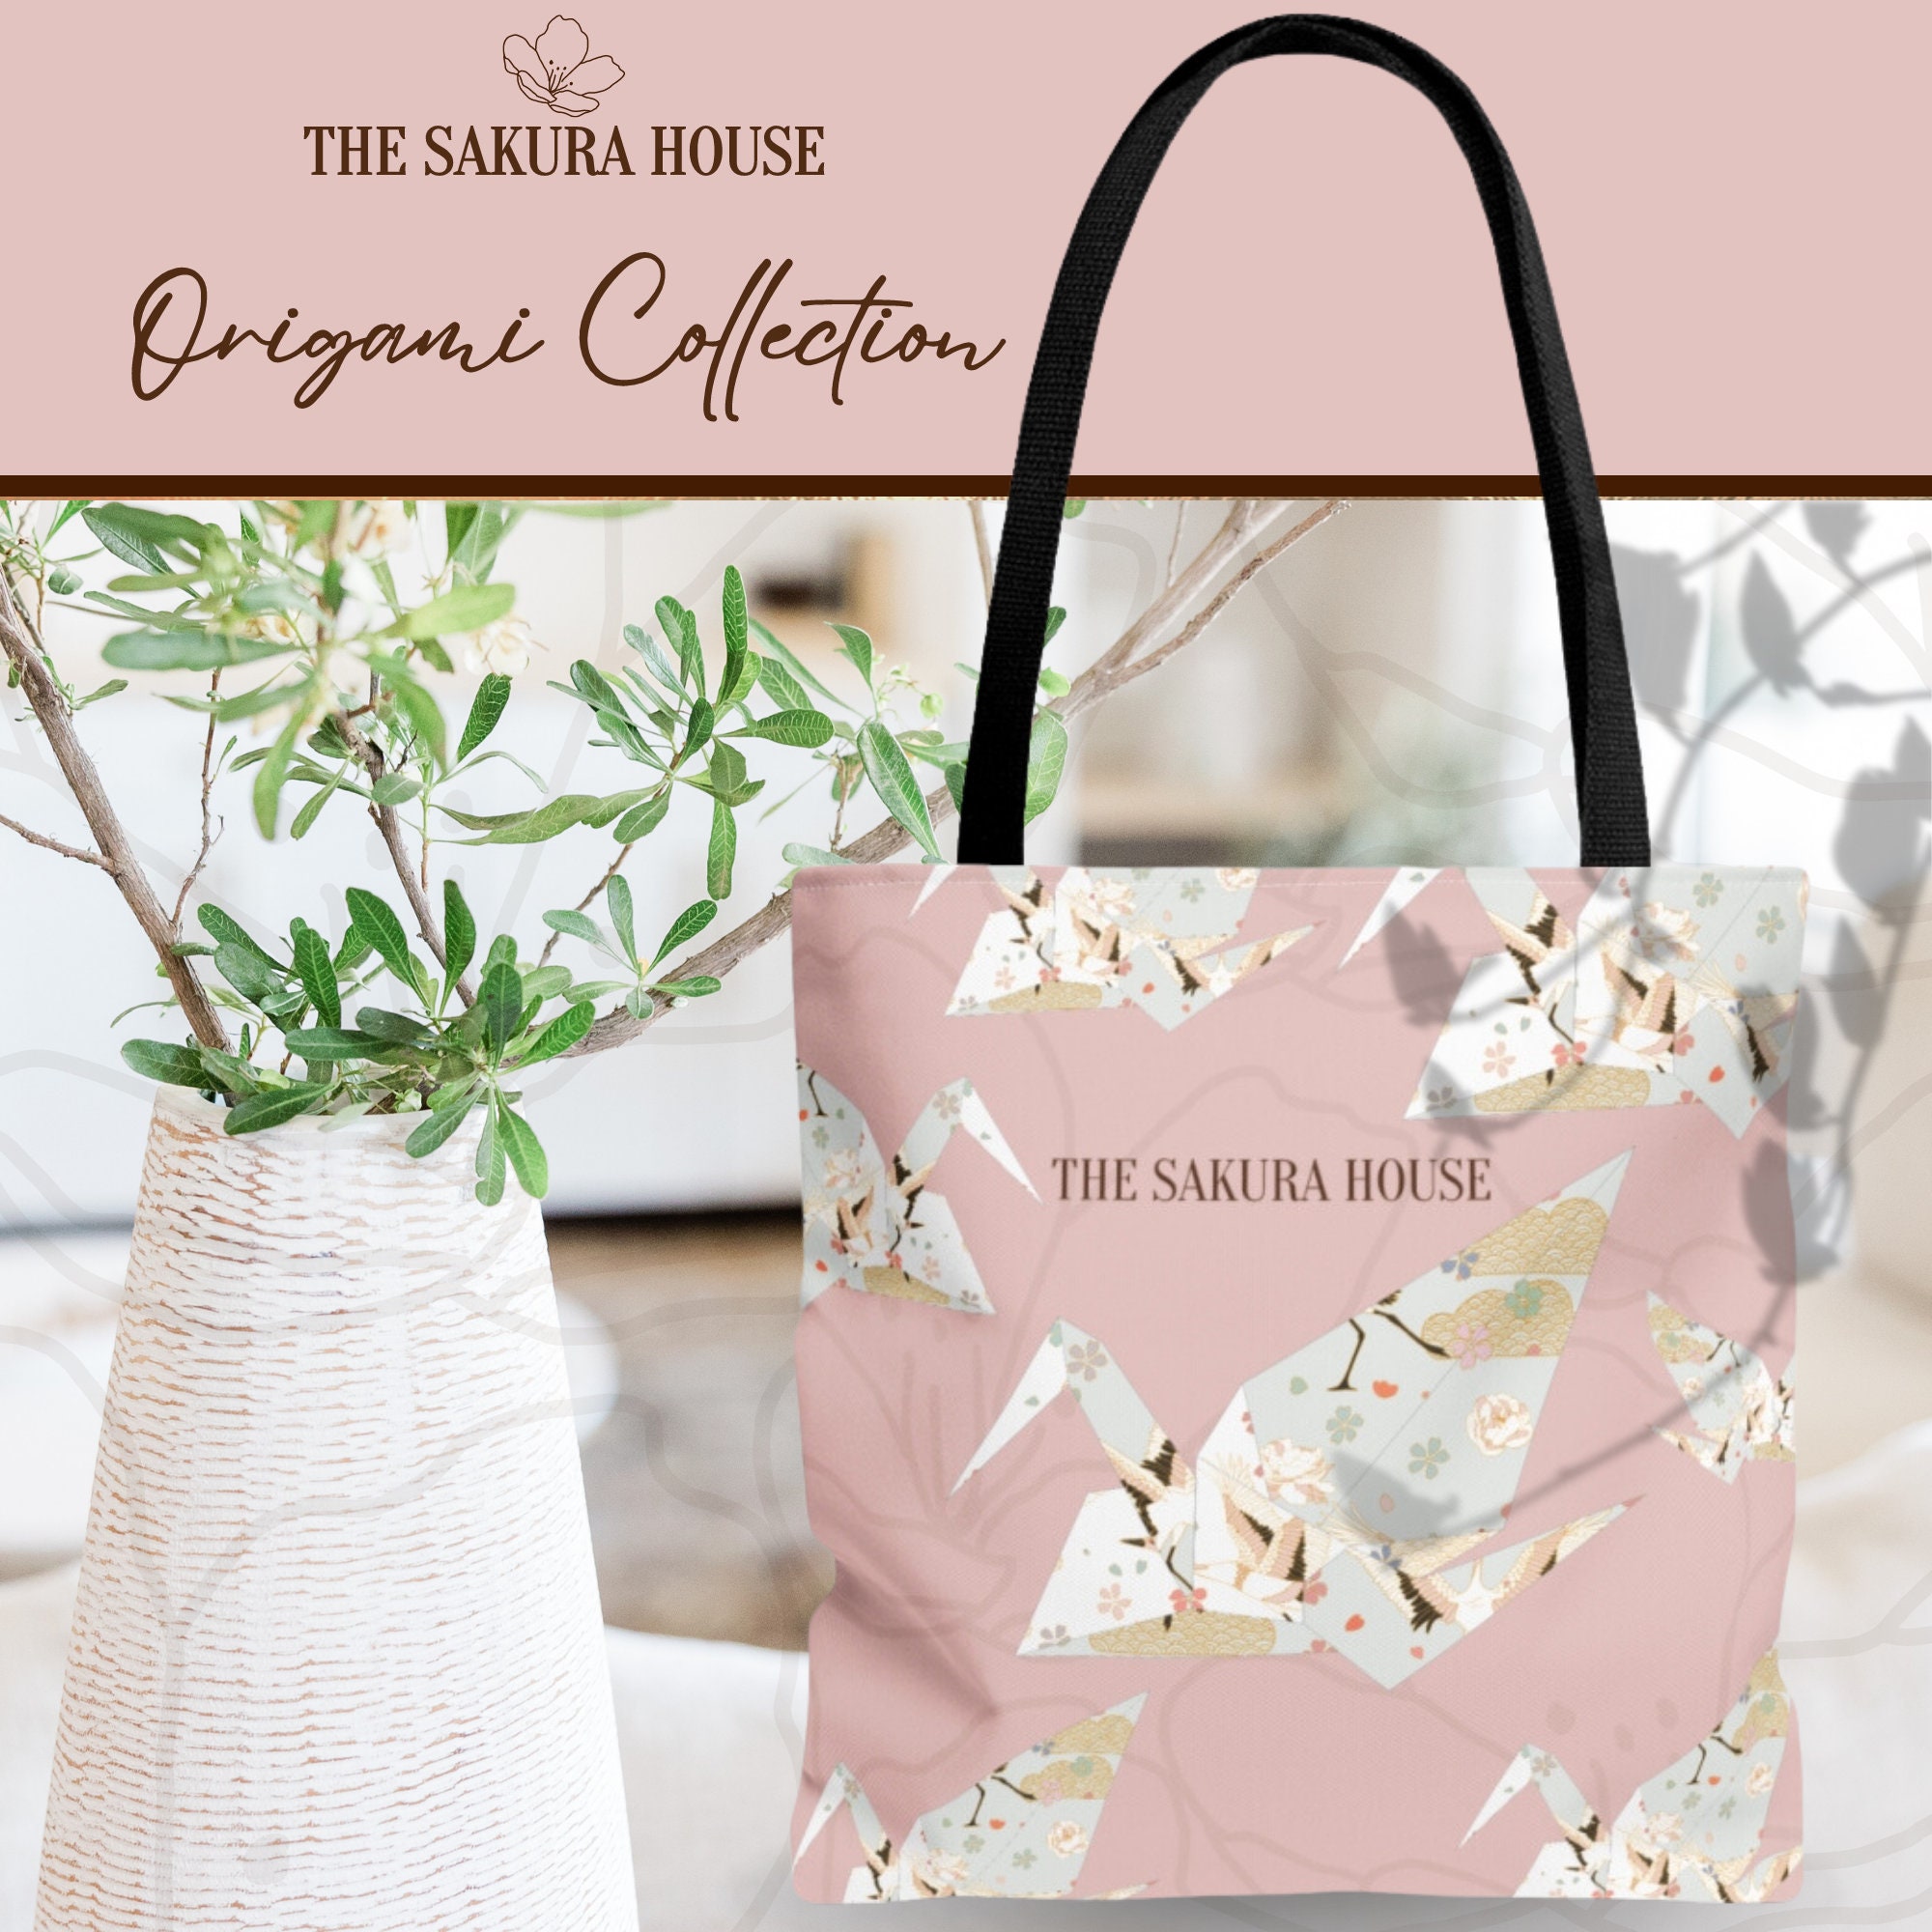 Cherry Blossom Tote Bag, Painting Style Japanese Sakura Tree on Grungy  Background with Inscription, Cloth Linen Reusable Bag for Shopping Books  Beach and More, 16.5 X 14, Cream, by Ambesonne 